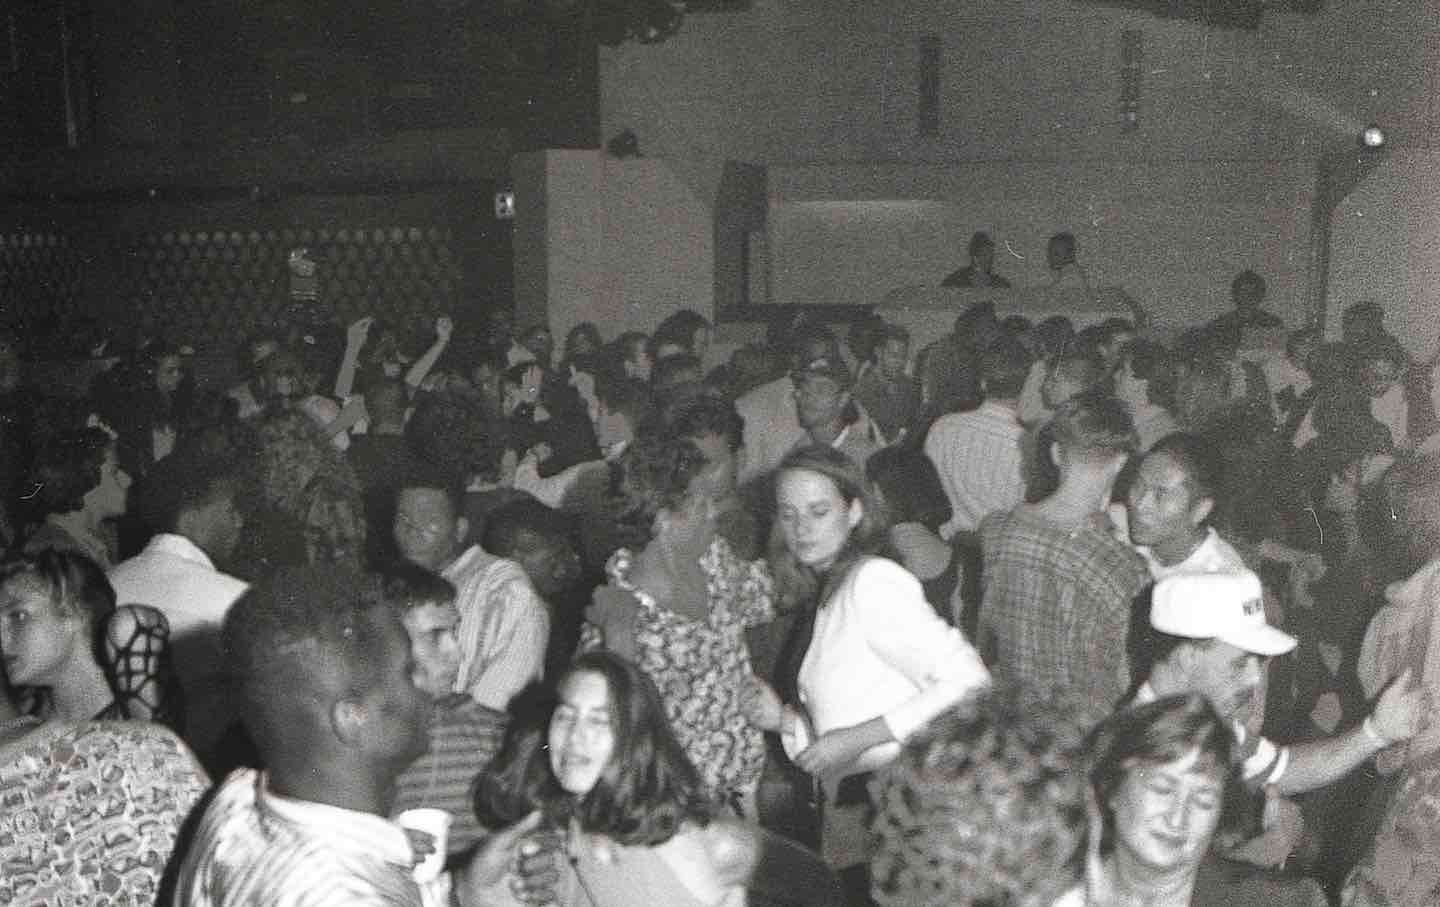 A party at Danceteria in New York City, 1990.